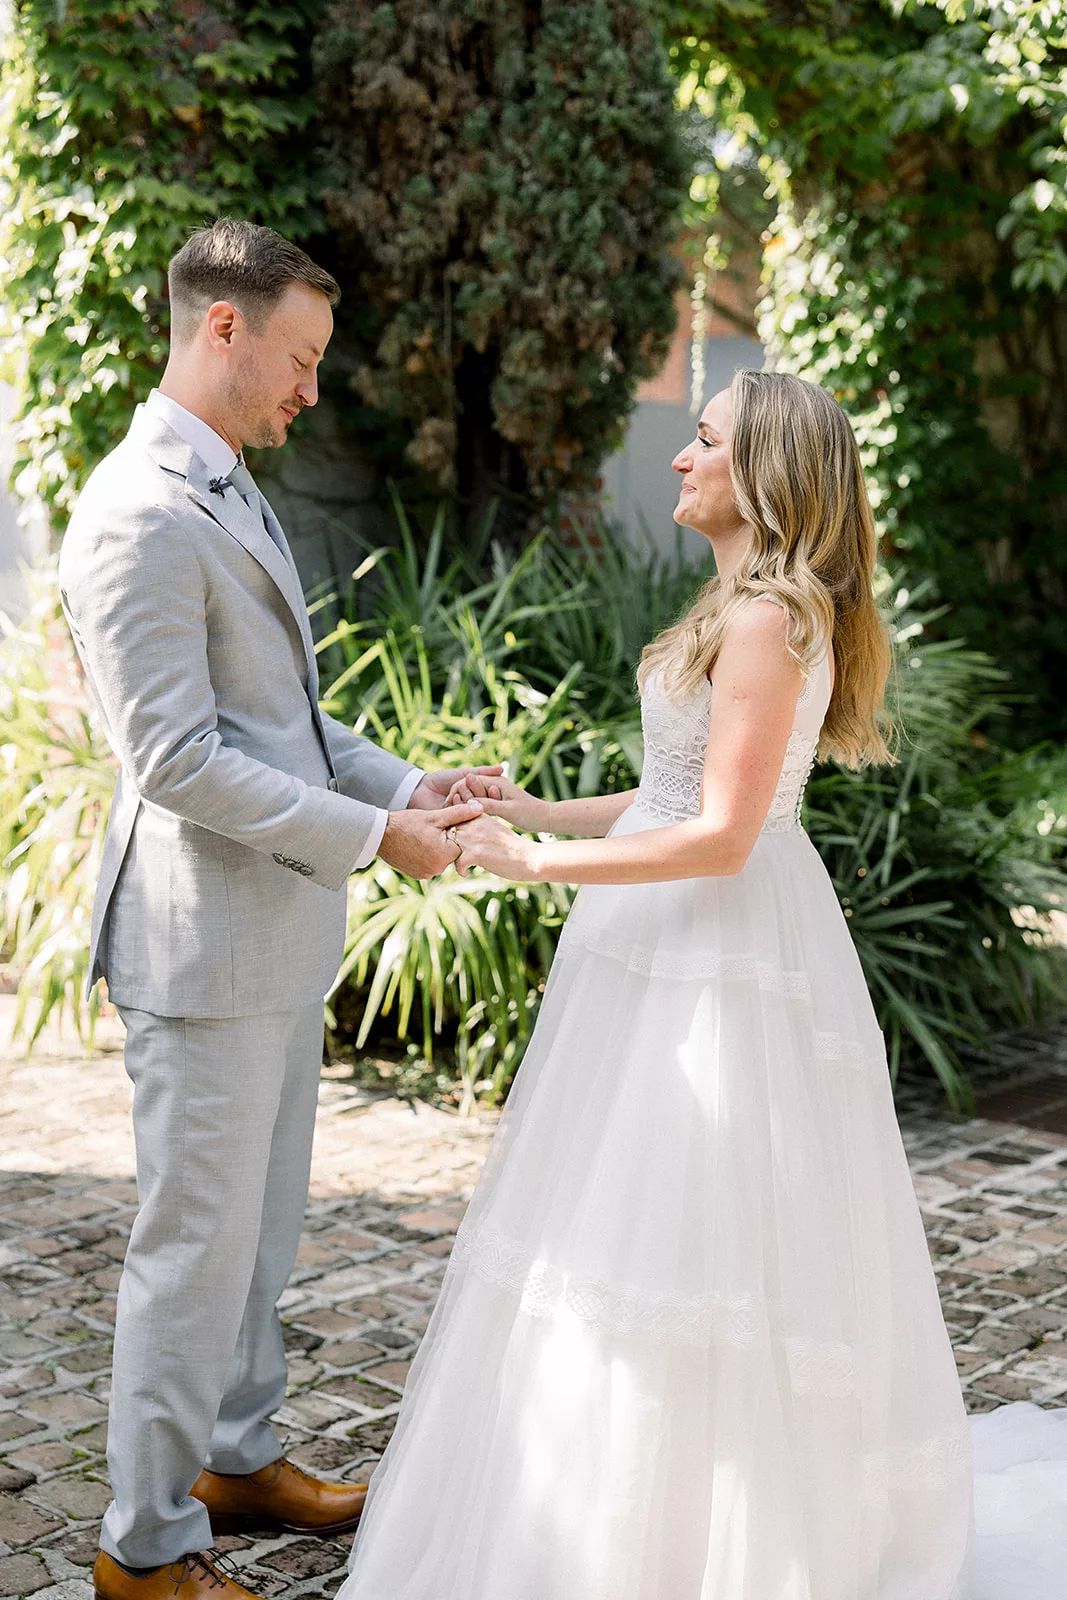 Newlyweds hold hands while standing on a brick patio in a garden covered in ivy